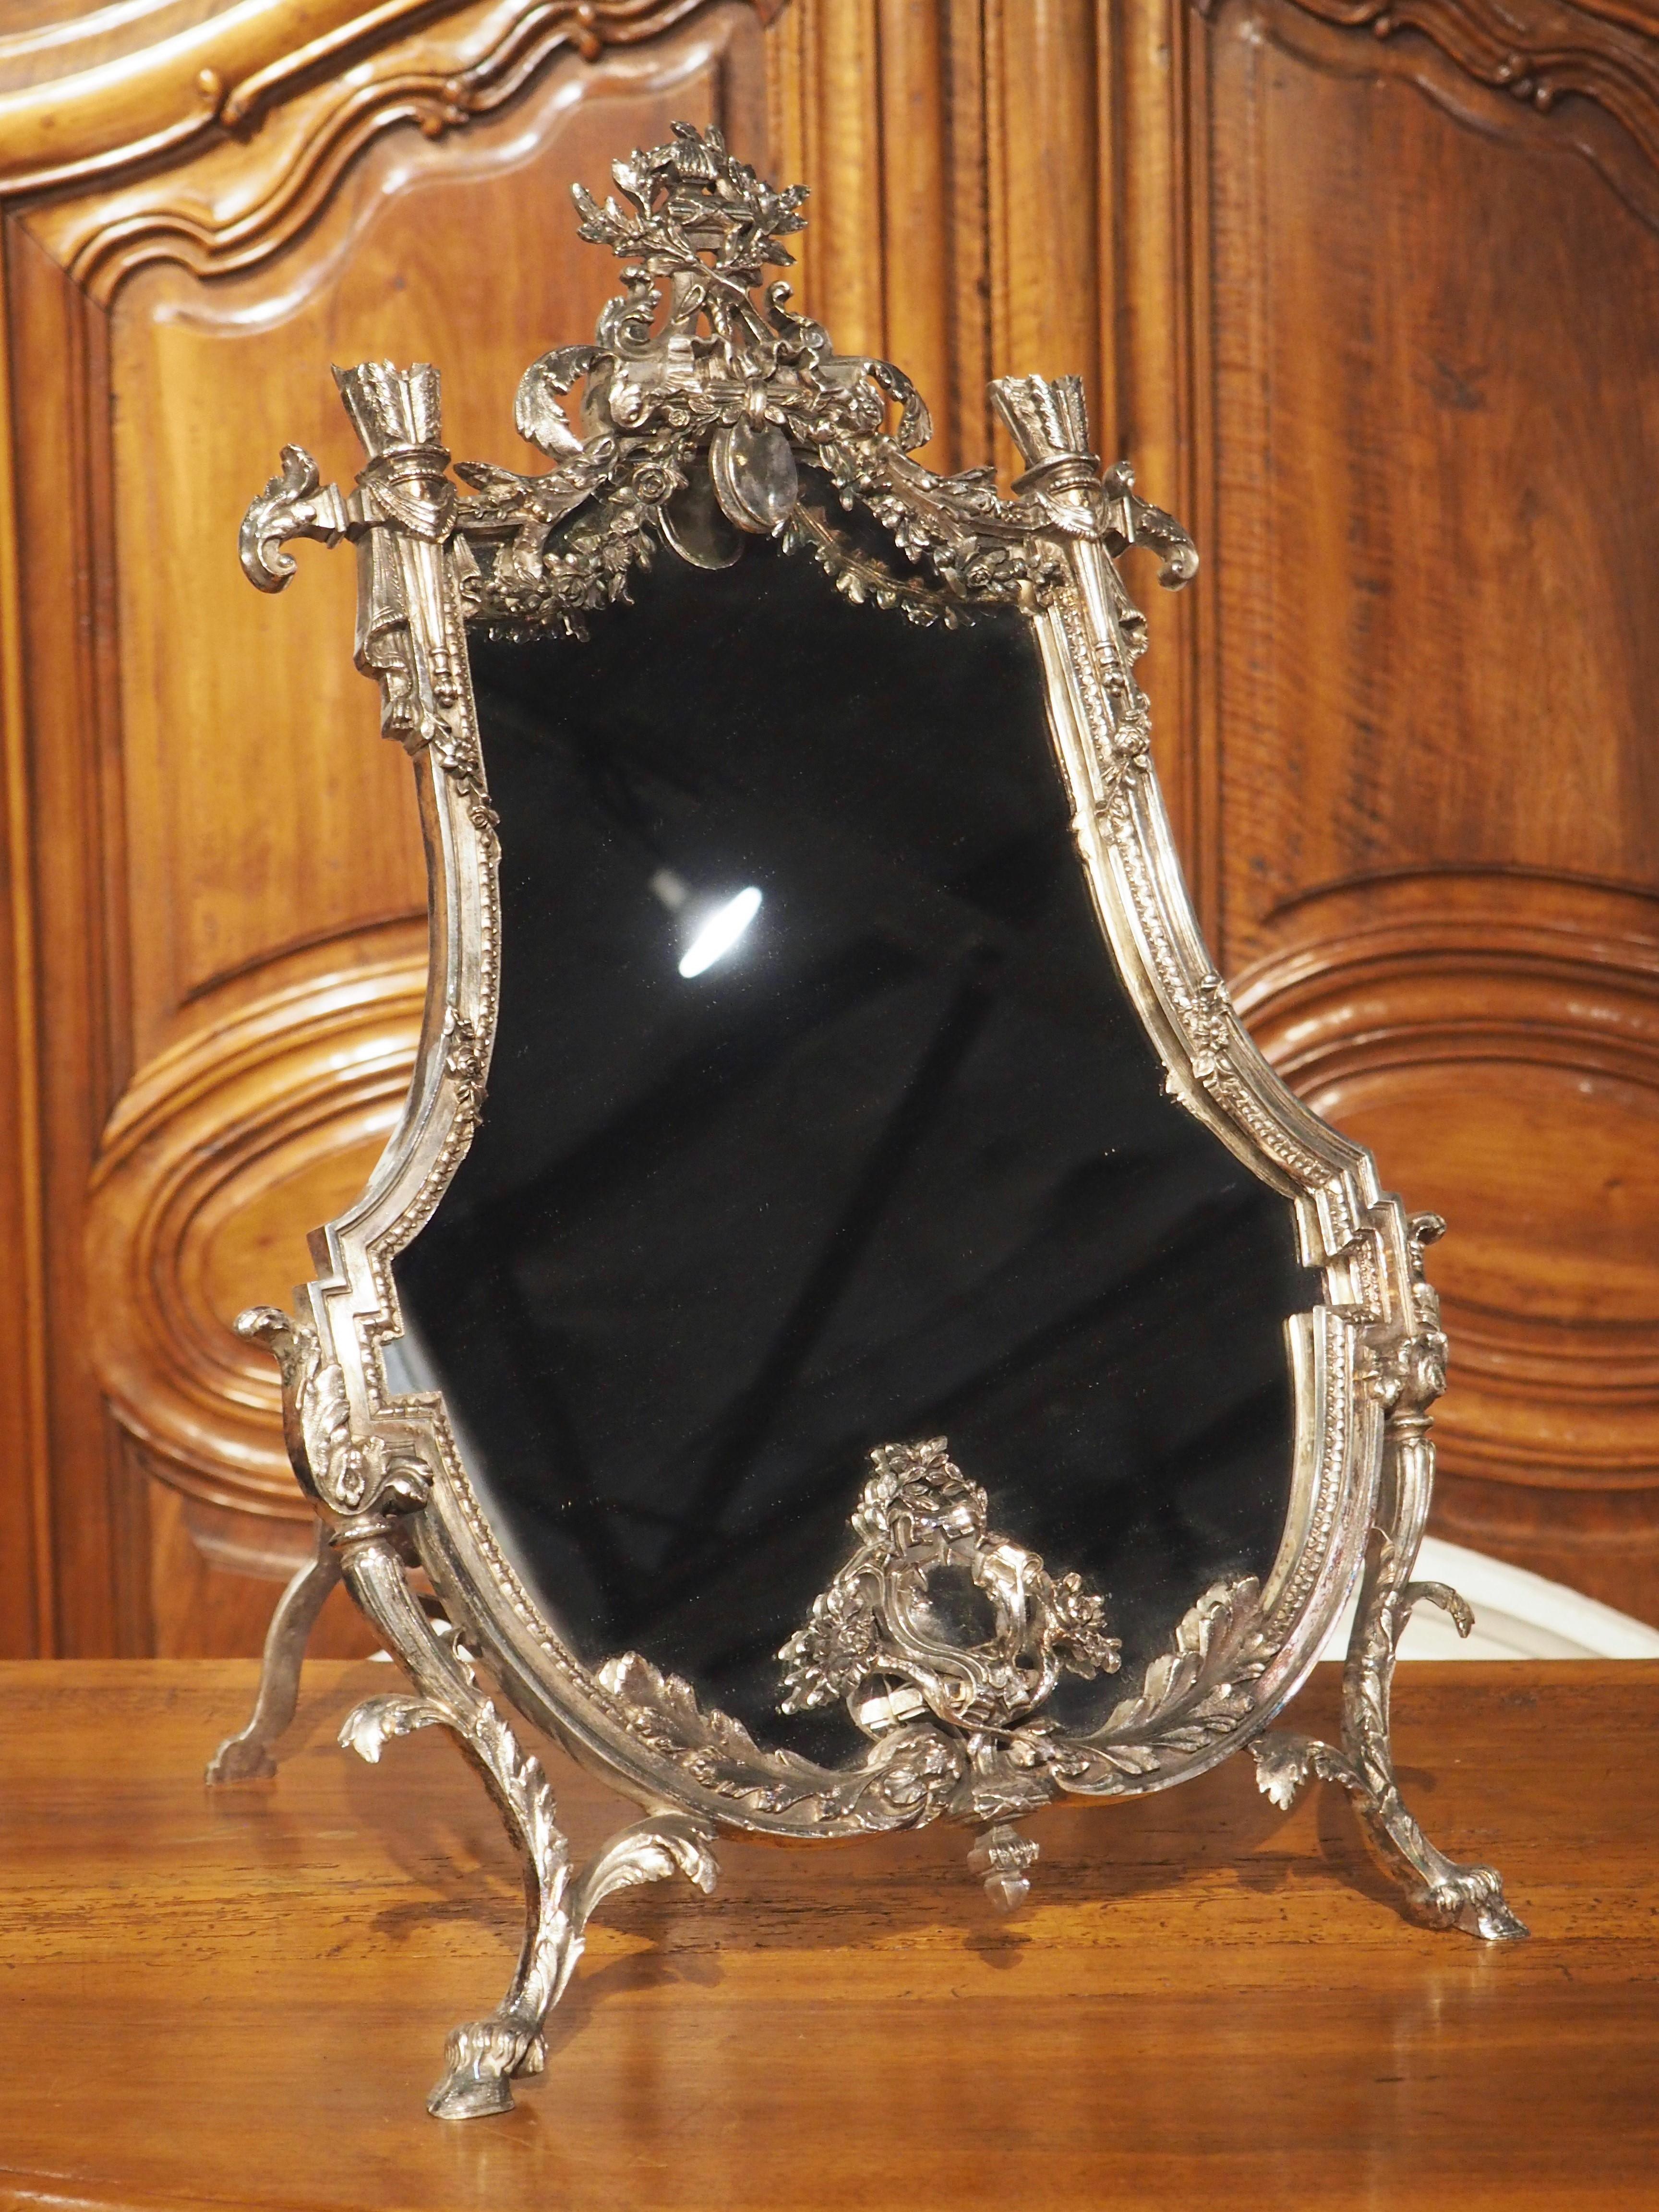 A unique production from the Napoleon III period, this silvered bronze table mirror features Neoclassical motifs that were prevalent during the “Second Empire”. The mirror rests upon a symmetrical two-legged easel stand with pierced elements. Two